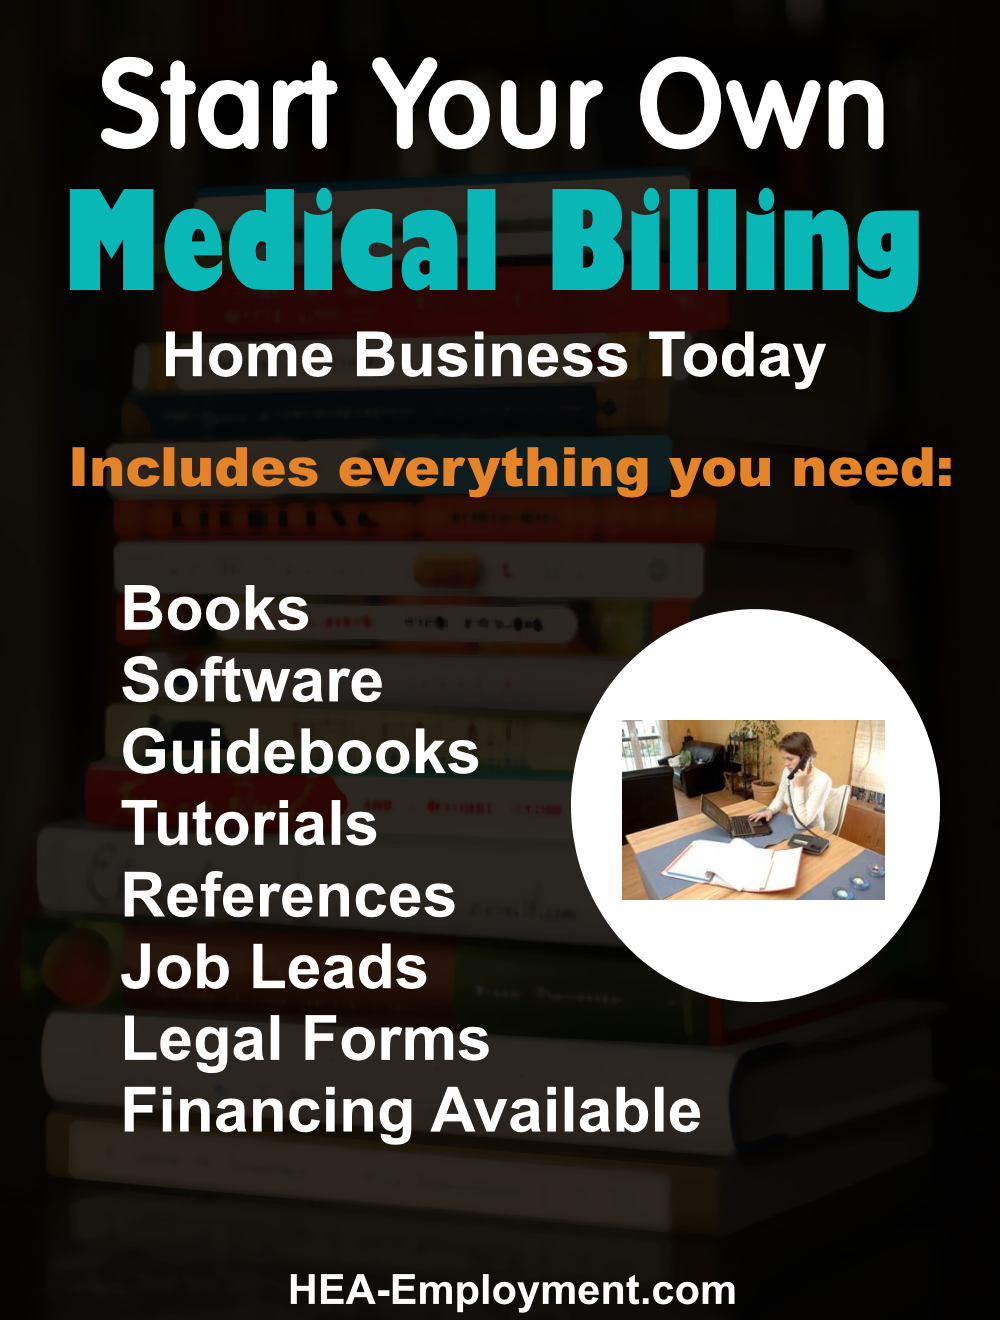 Start your own medical billing legitimate home based business. Fully equipped home business package with everything you need to get started. Productivity software, tutorials, guidebooks, references, manuals, tax advice and legal forms are included with each kit. Be your own boss!